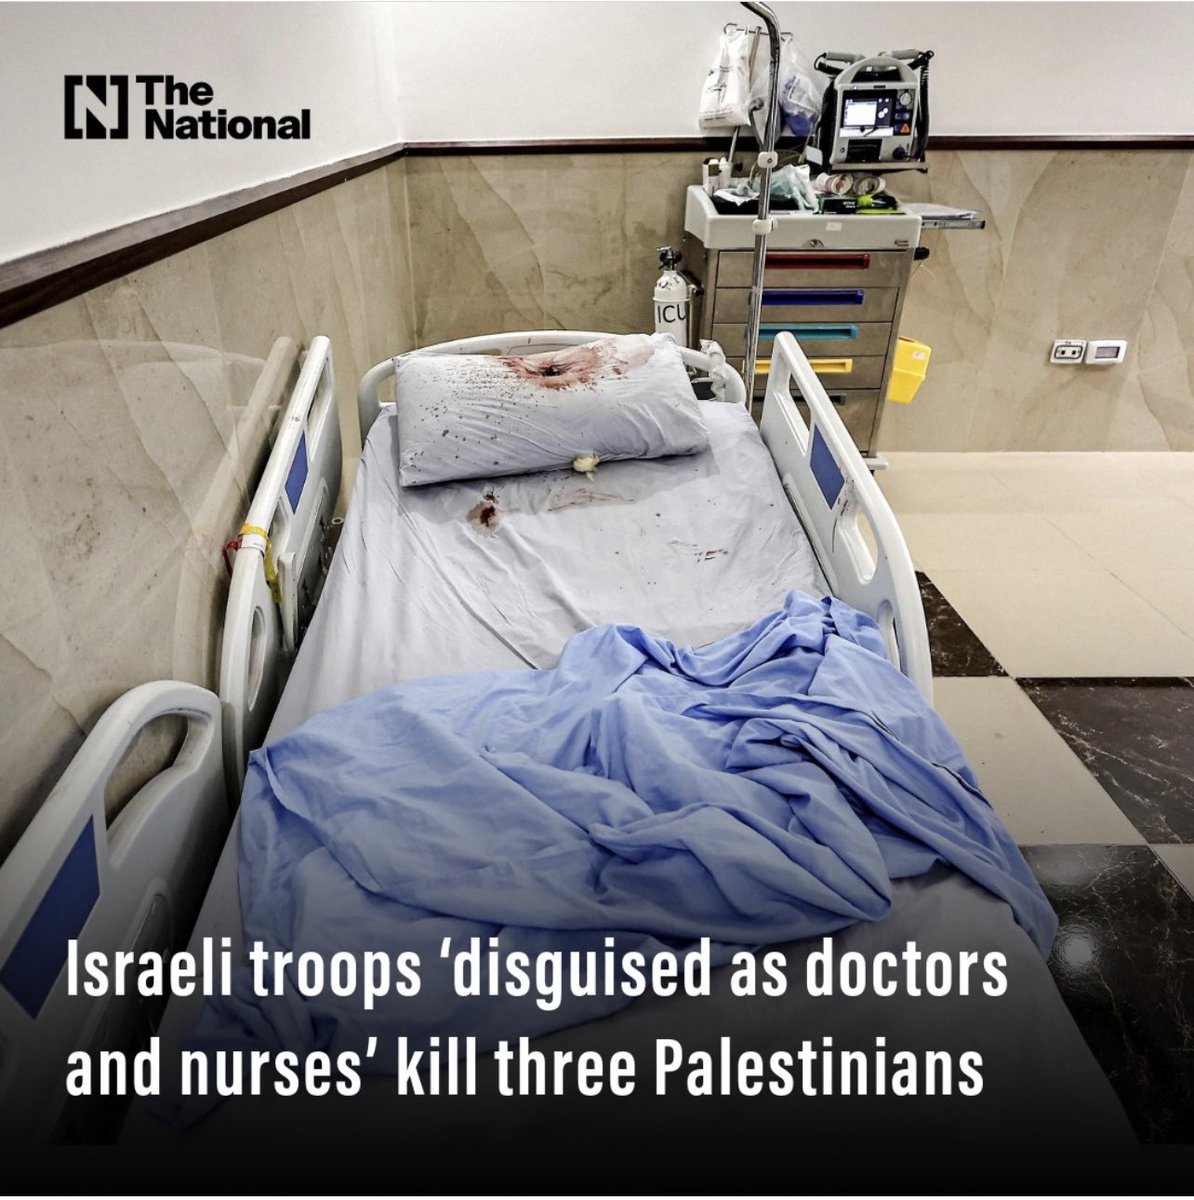 Israel will continue to commit war crimes. These people were in hospital IN THE WEST BANK. If there is no accountability they will continue to commit such atrocities.